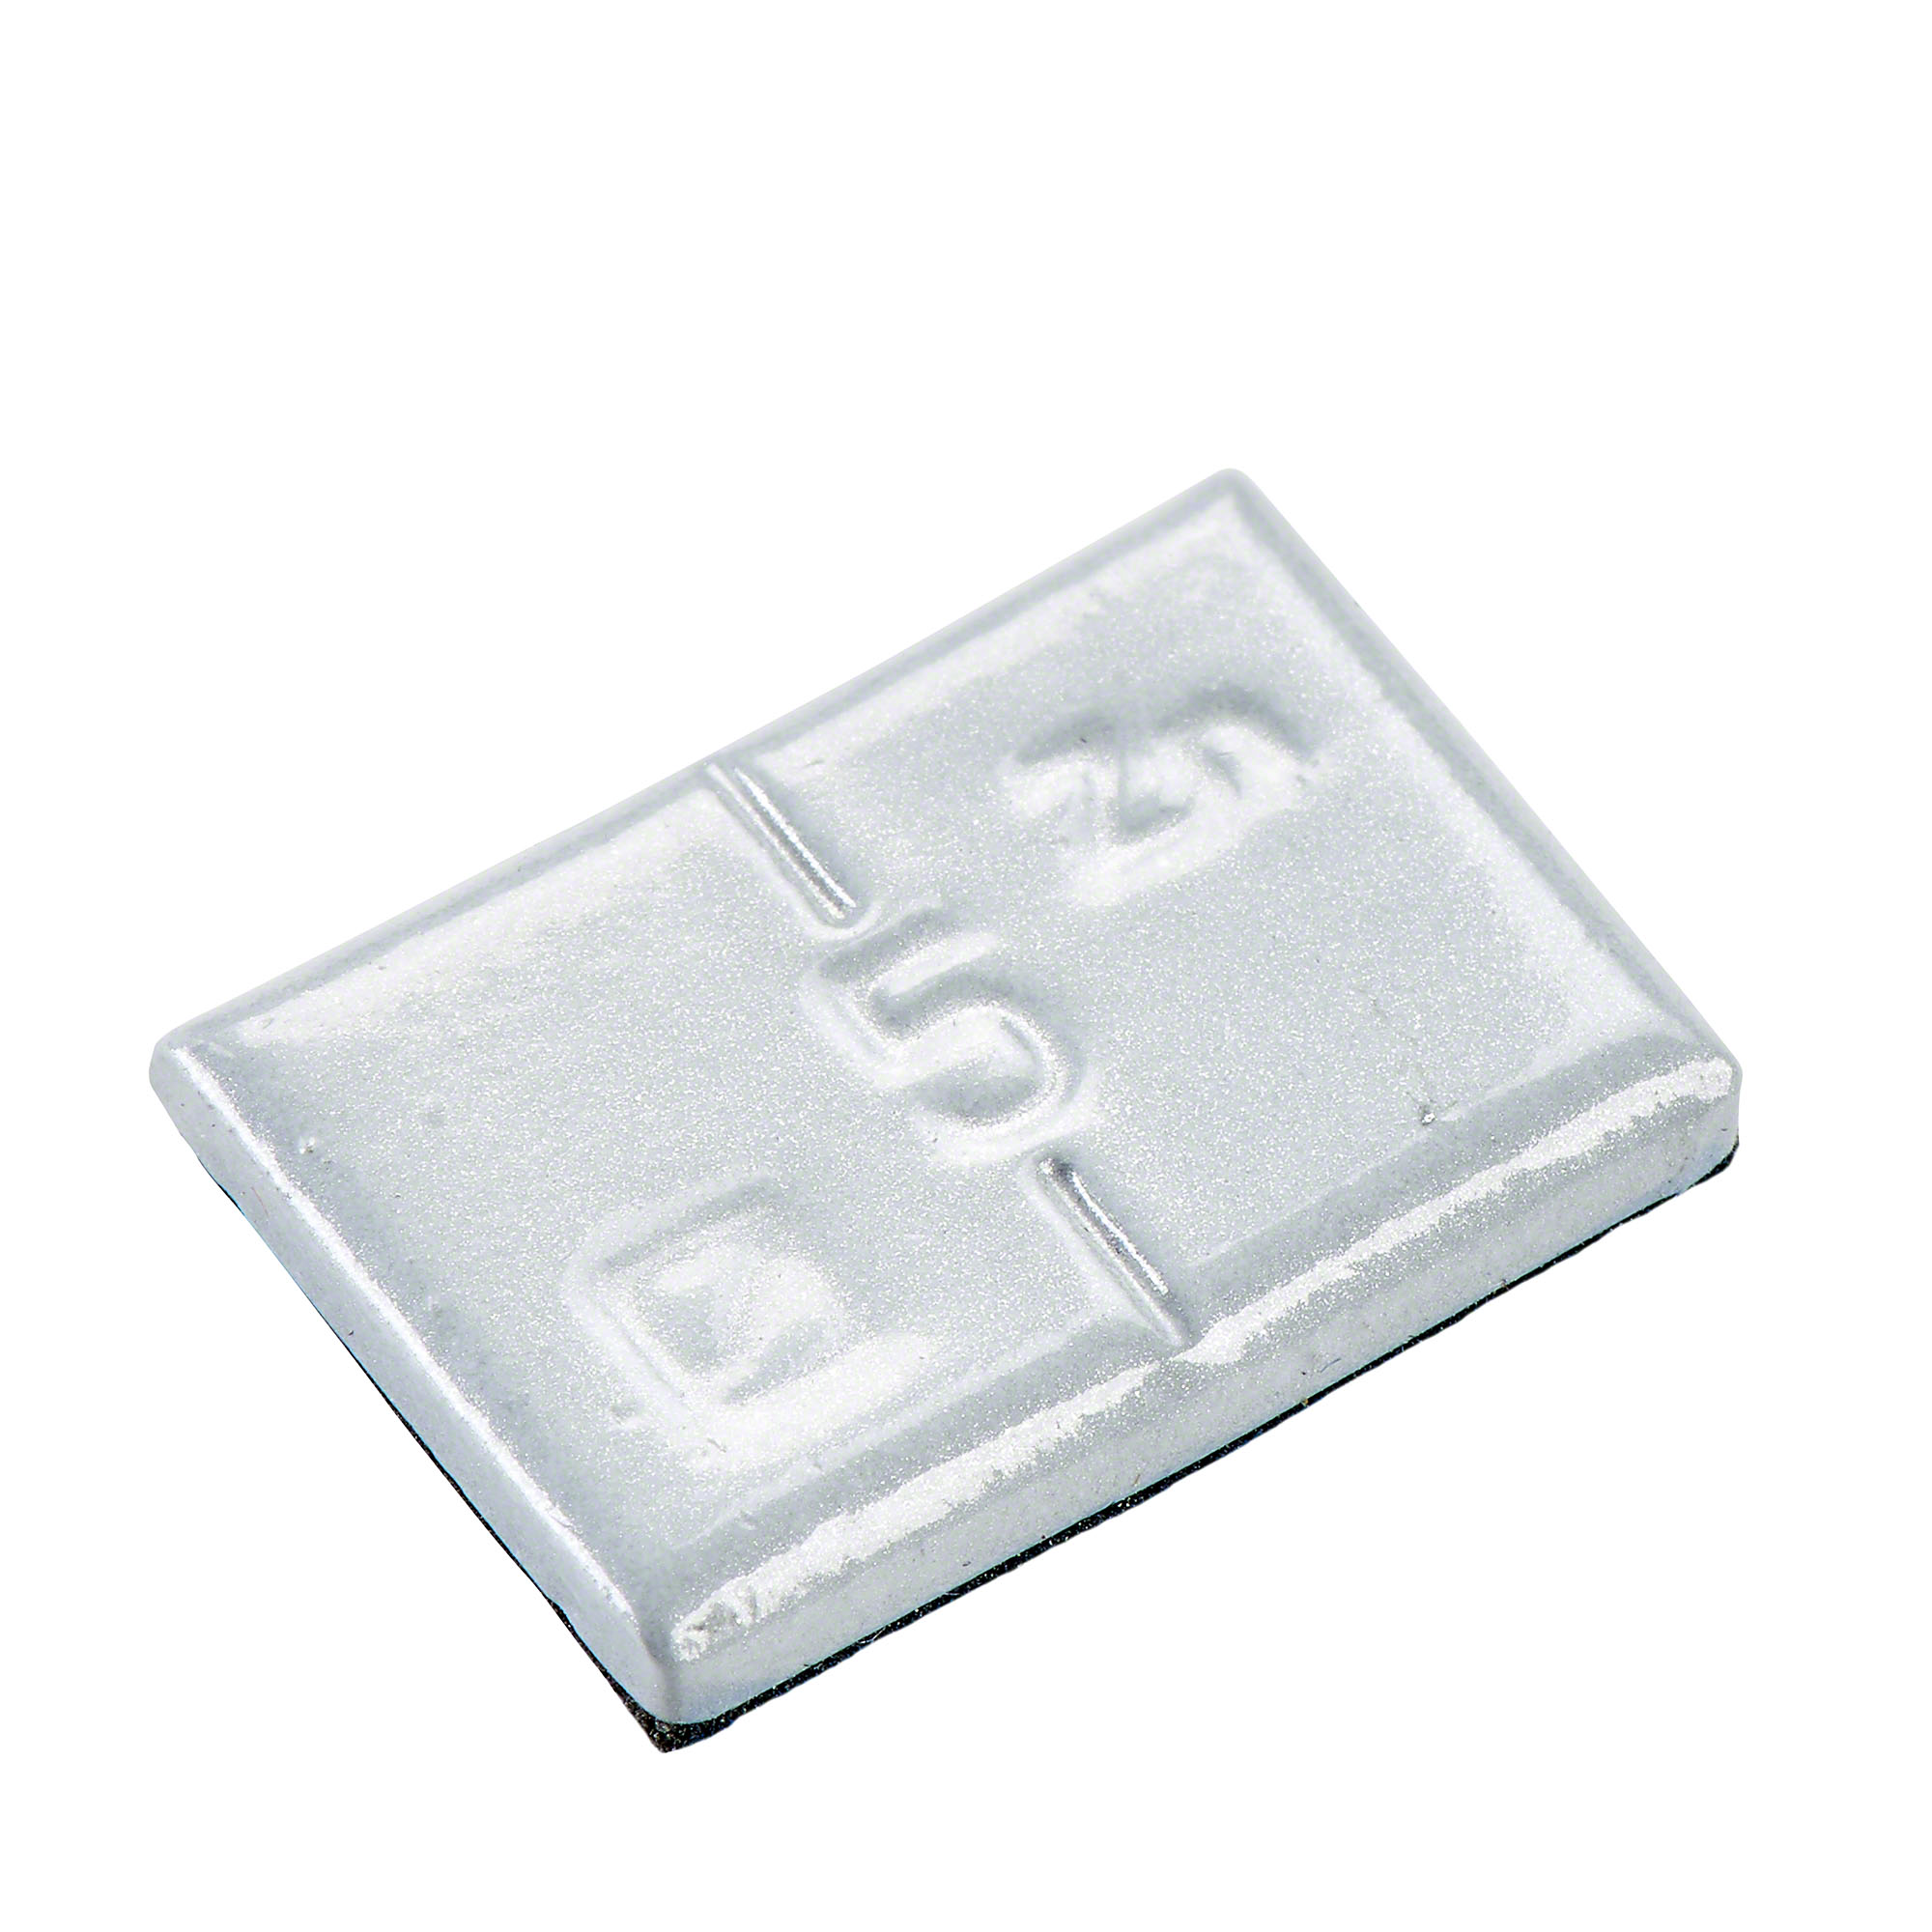 adhesive weight - Typ 361, 5 g, zinc, silver